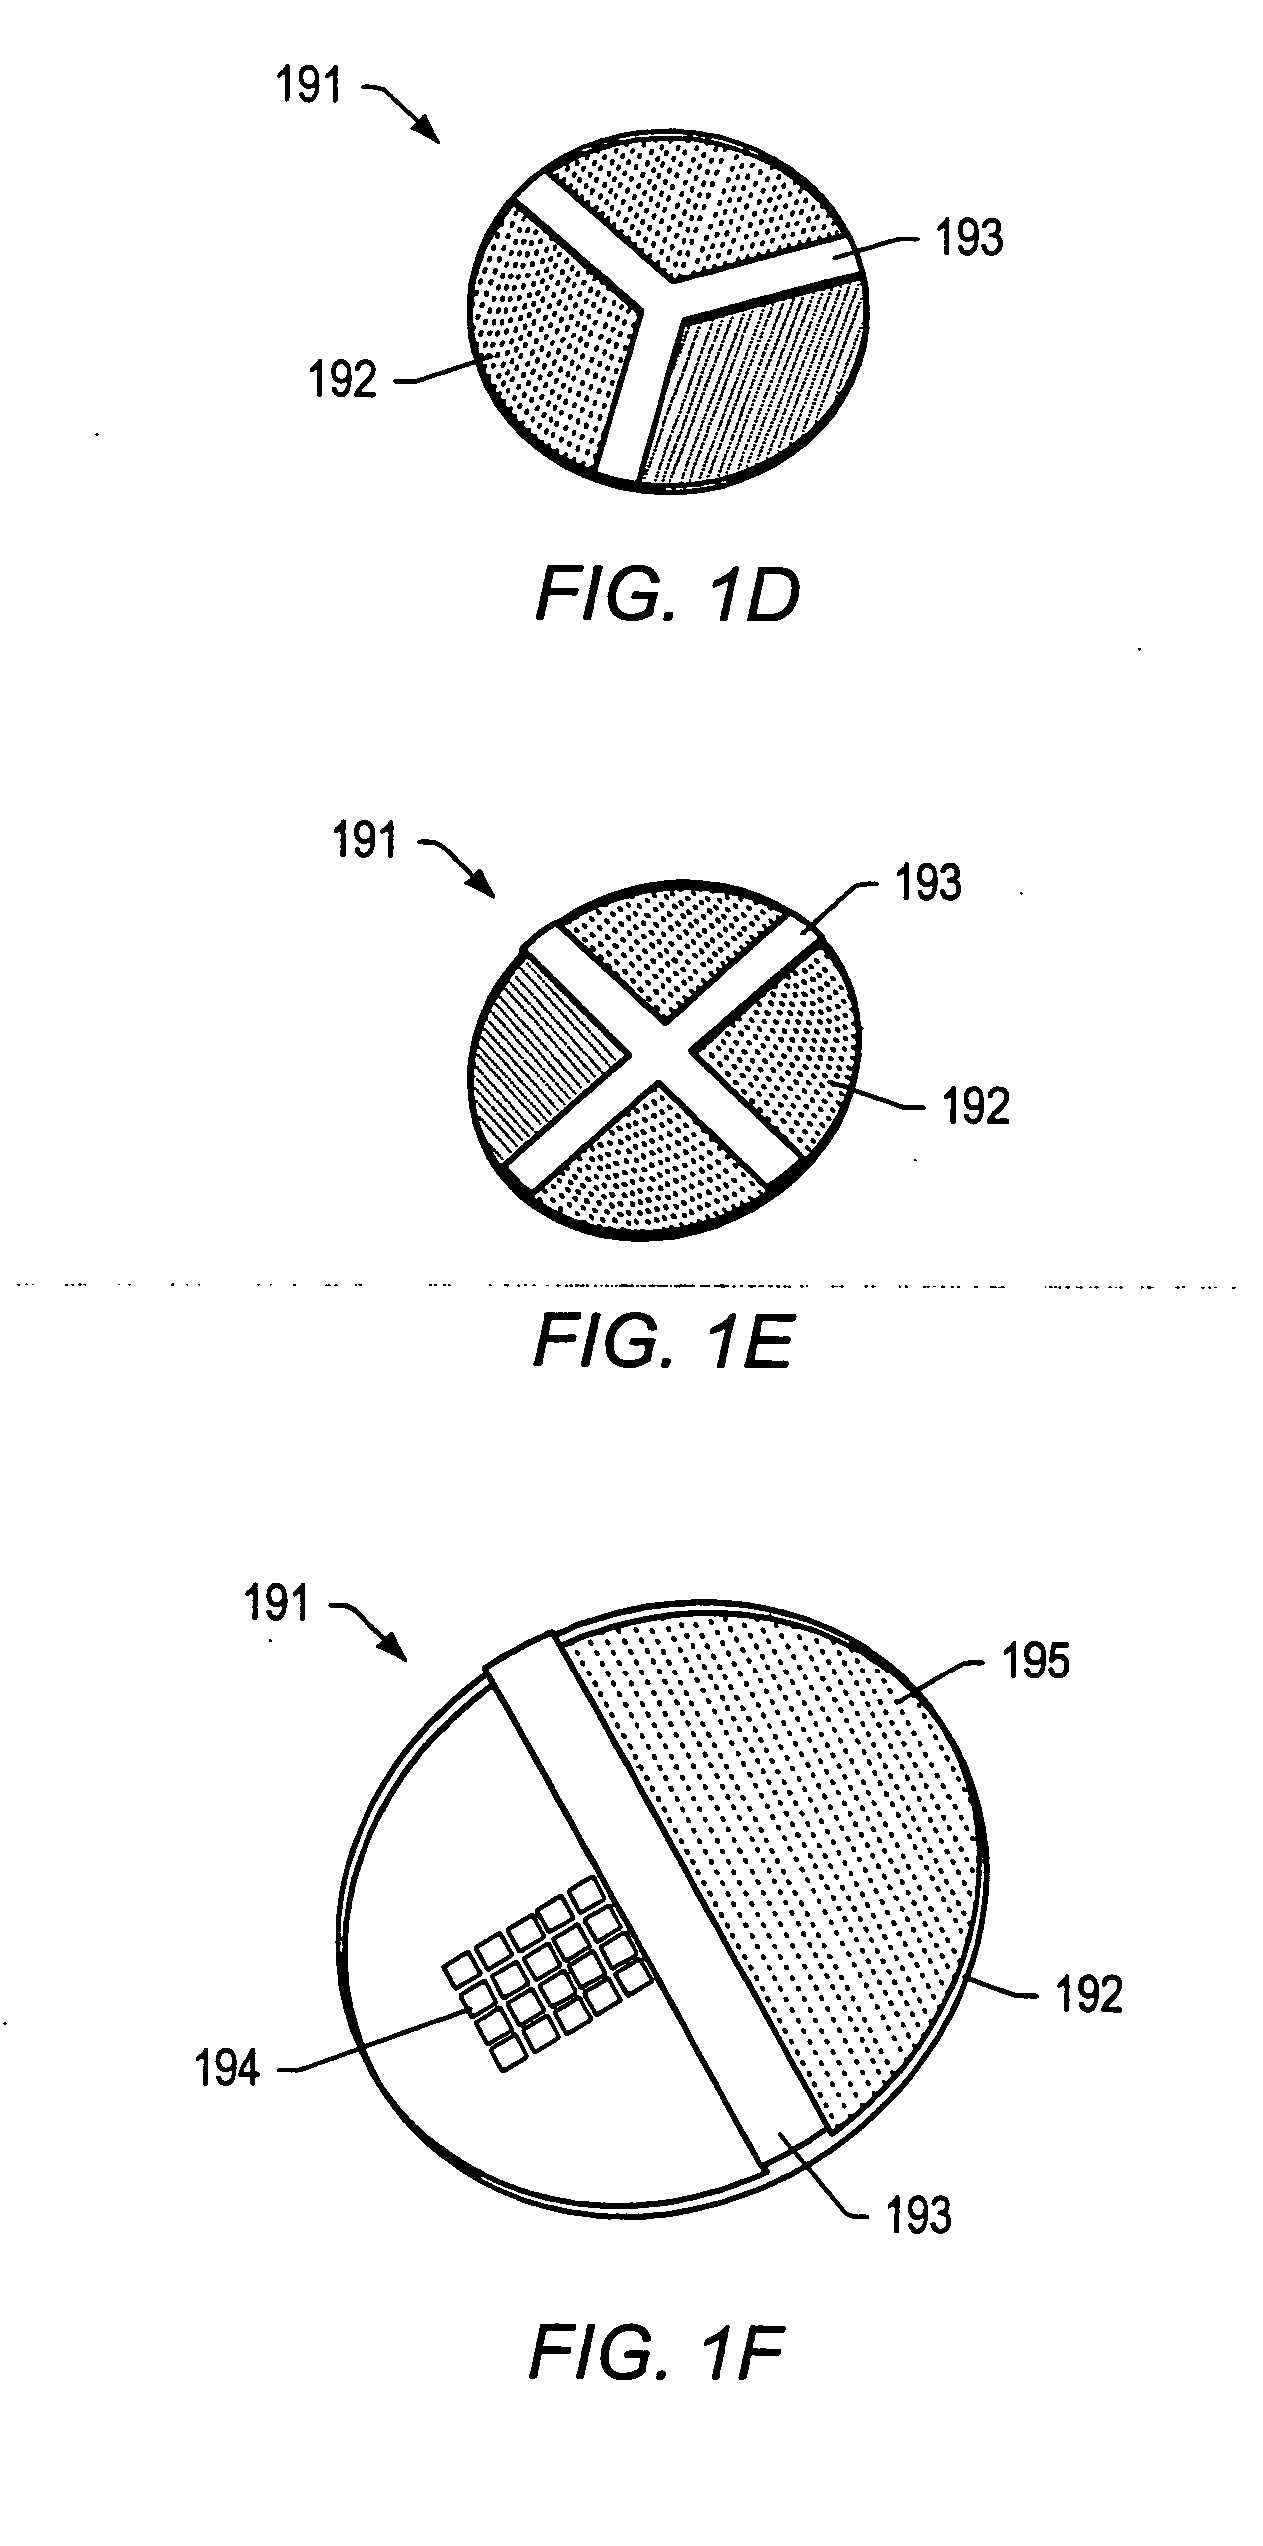 Integration of fluids and reagents into self-contained cartridges containing particle and membrane sensor elements